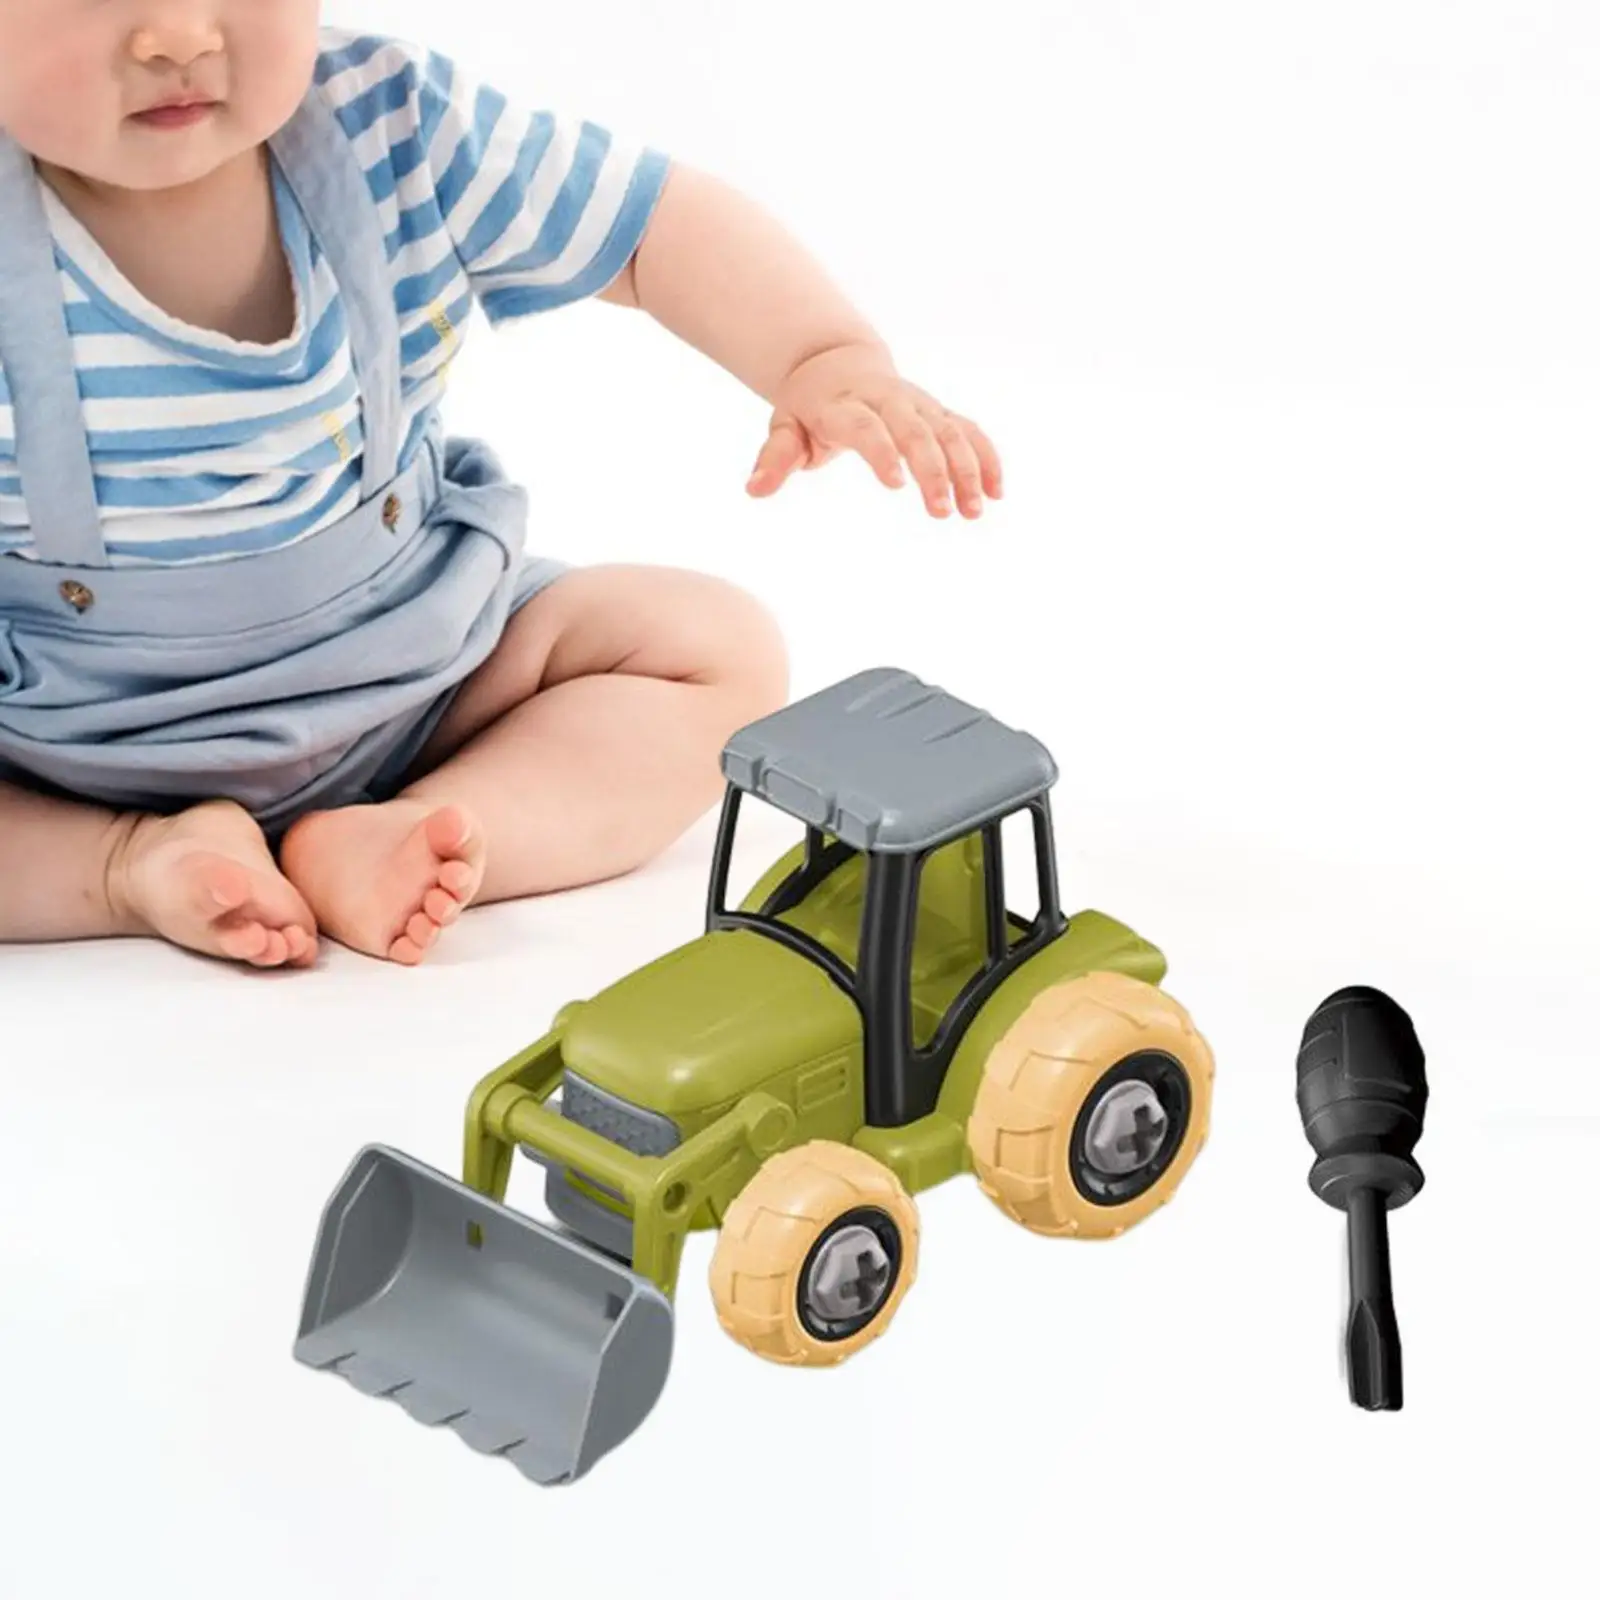 Take Apart Toy Excavator Truck W/ Screwdriver Construction Vehicles Building Excavator Toy for 3 4 5 6 7 Year Old Birthday Gifts